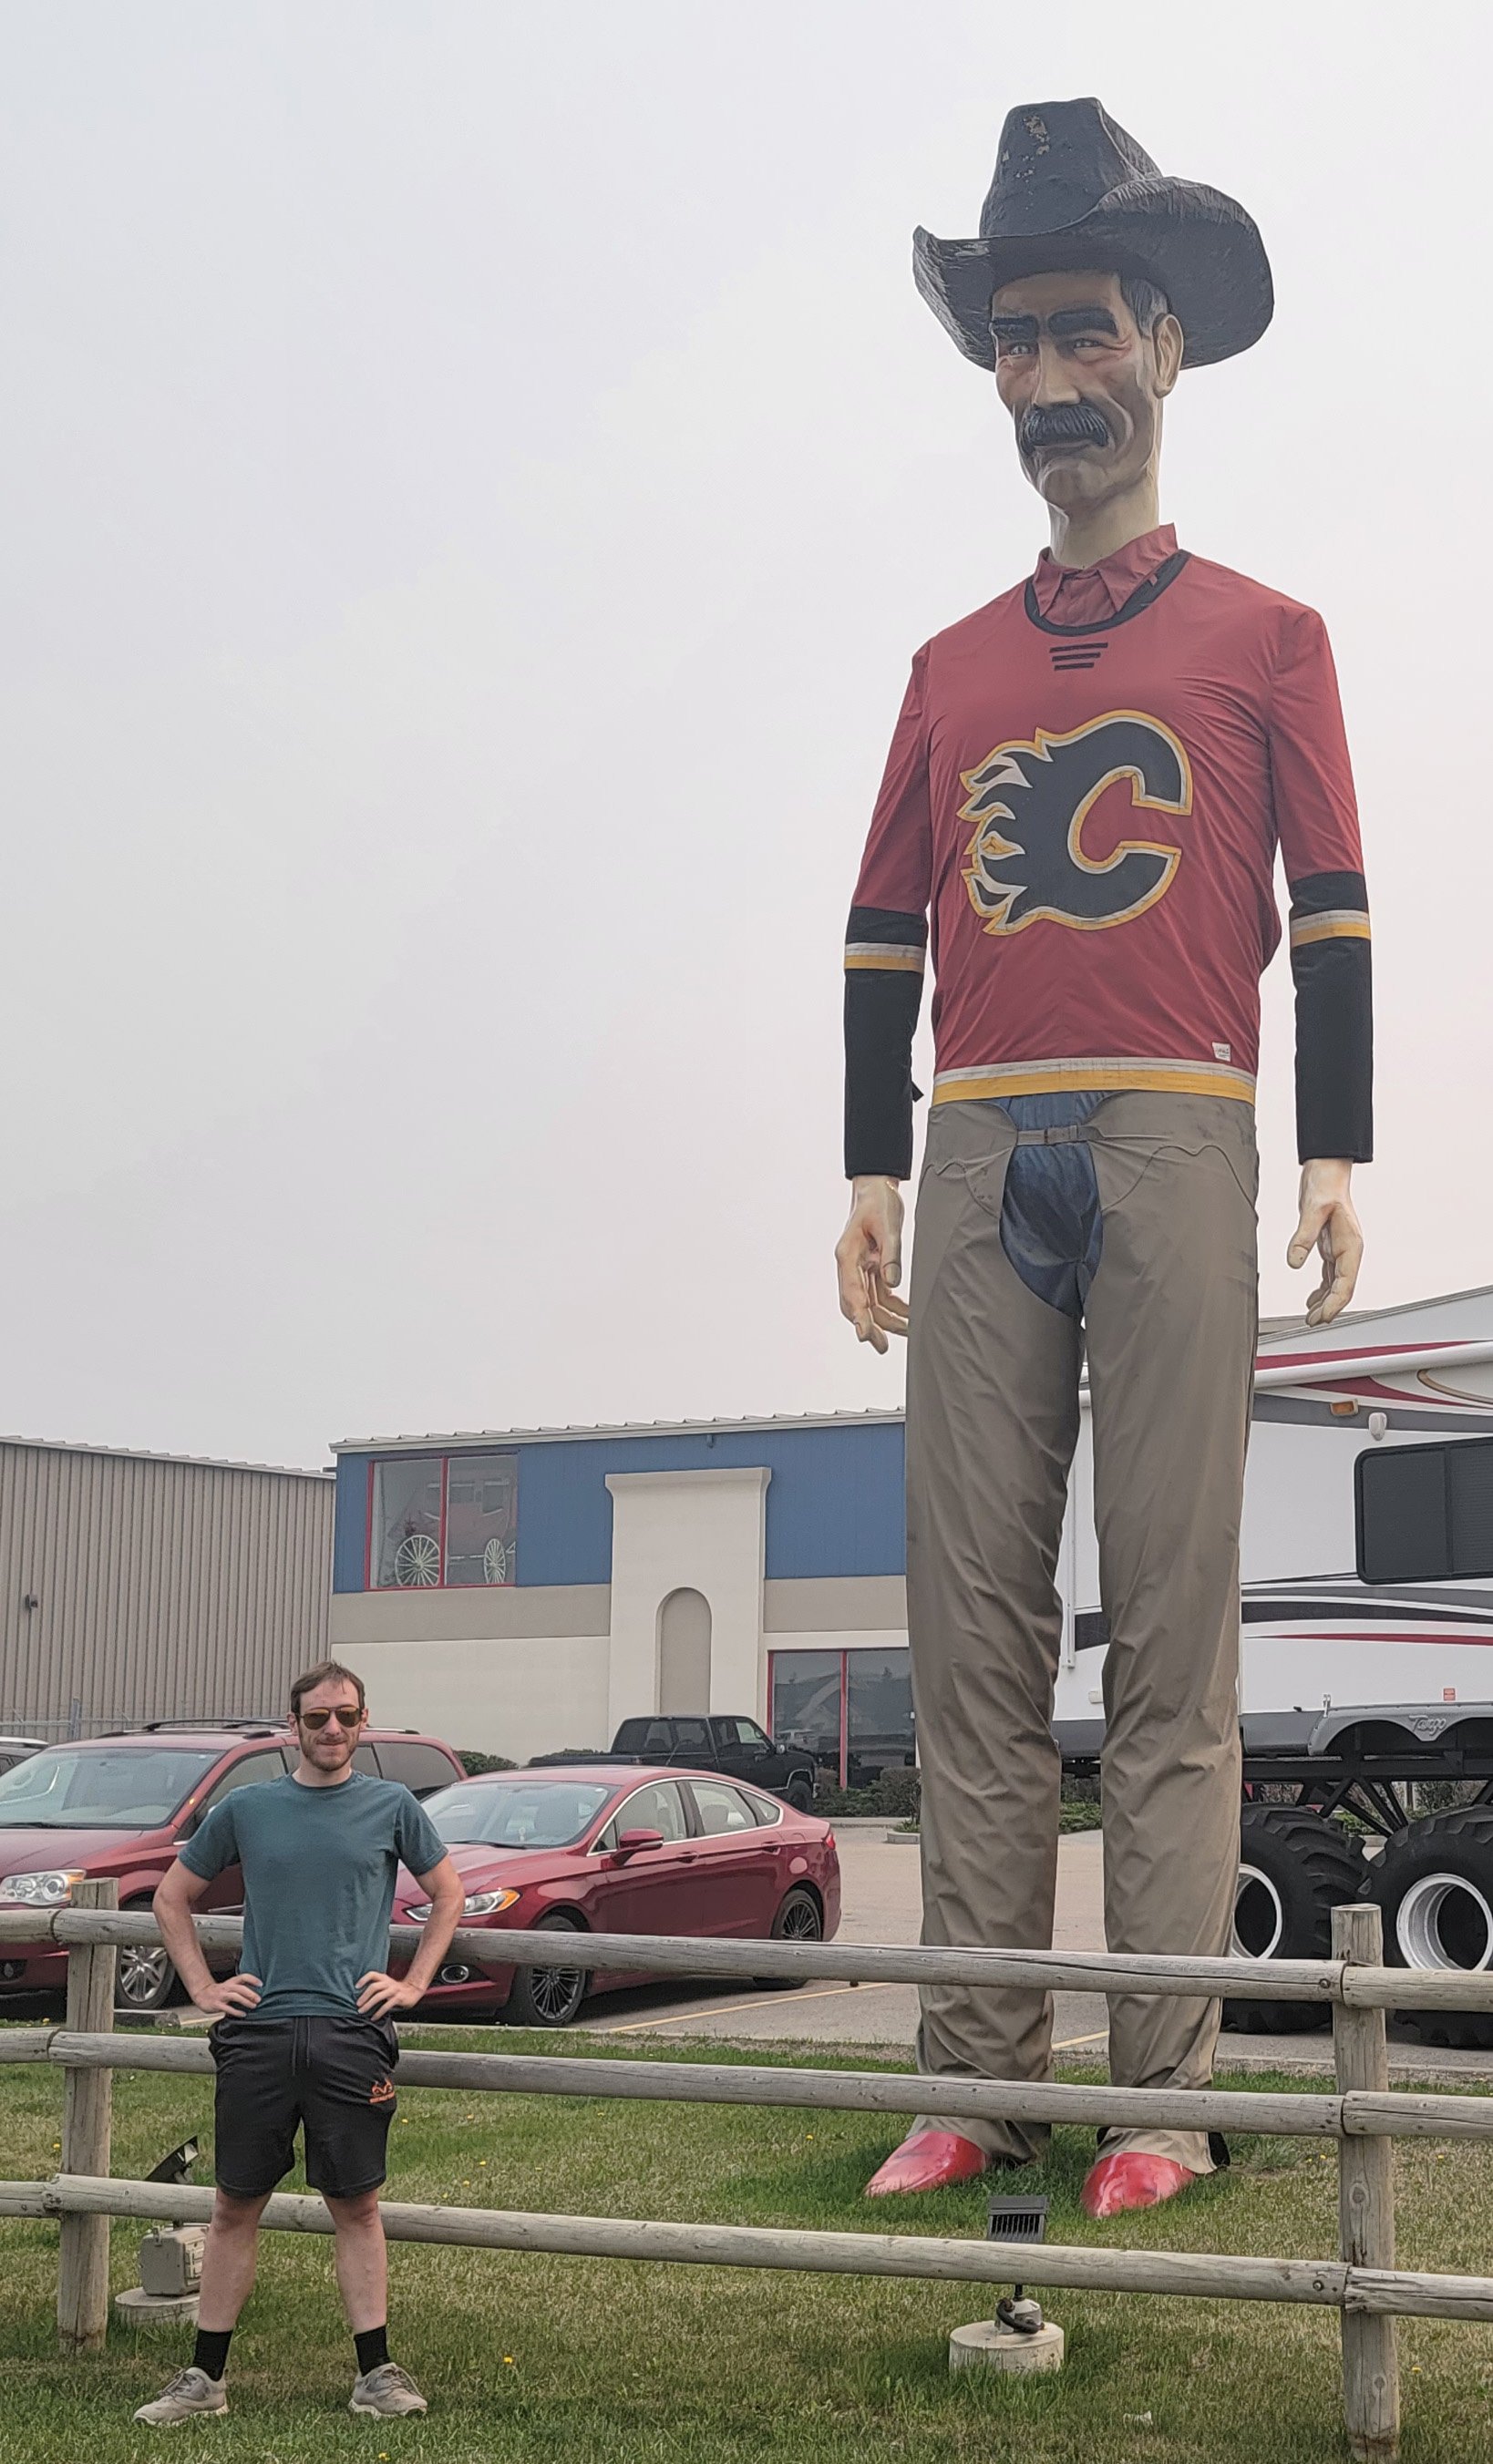 Giant cowboy in Airdrie, AB, just north of Calgary.